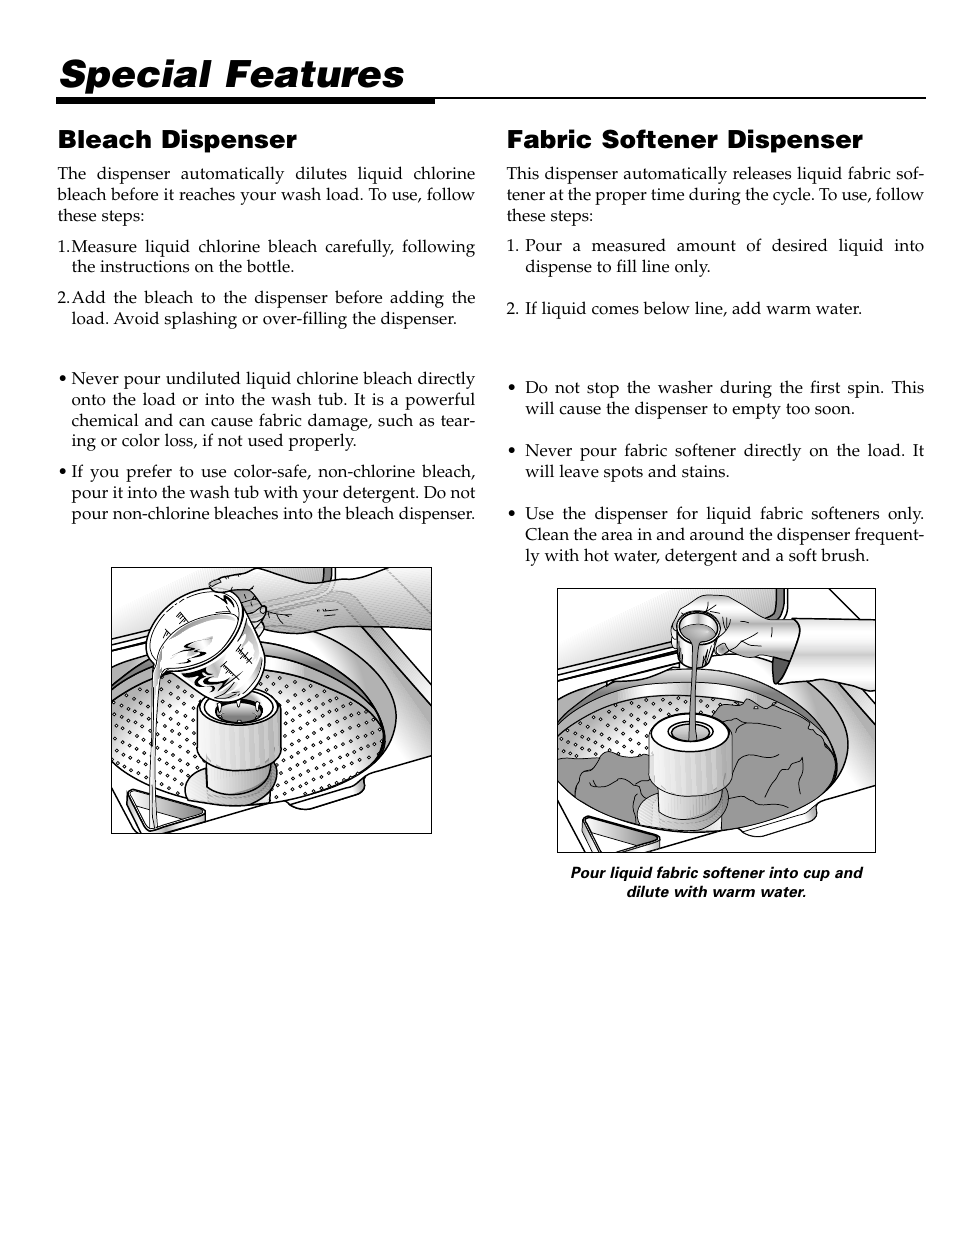 Special features, Bleach dispenser, Fabric softener dispenser | Maytag LAT2500AAE User Manual | Page 6 / 28